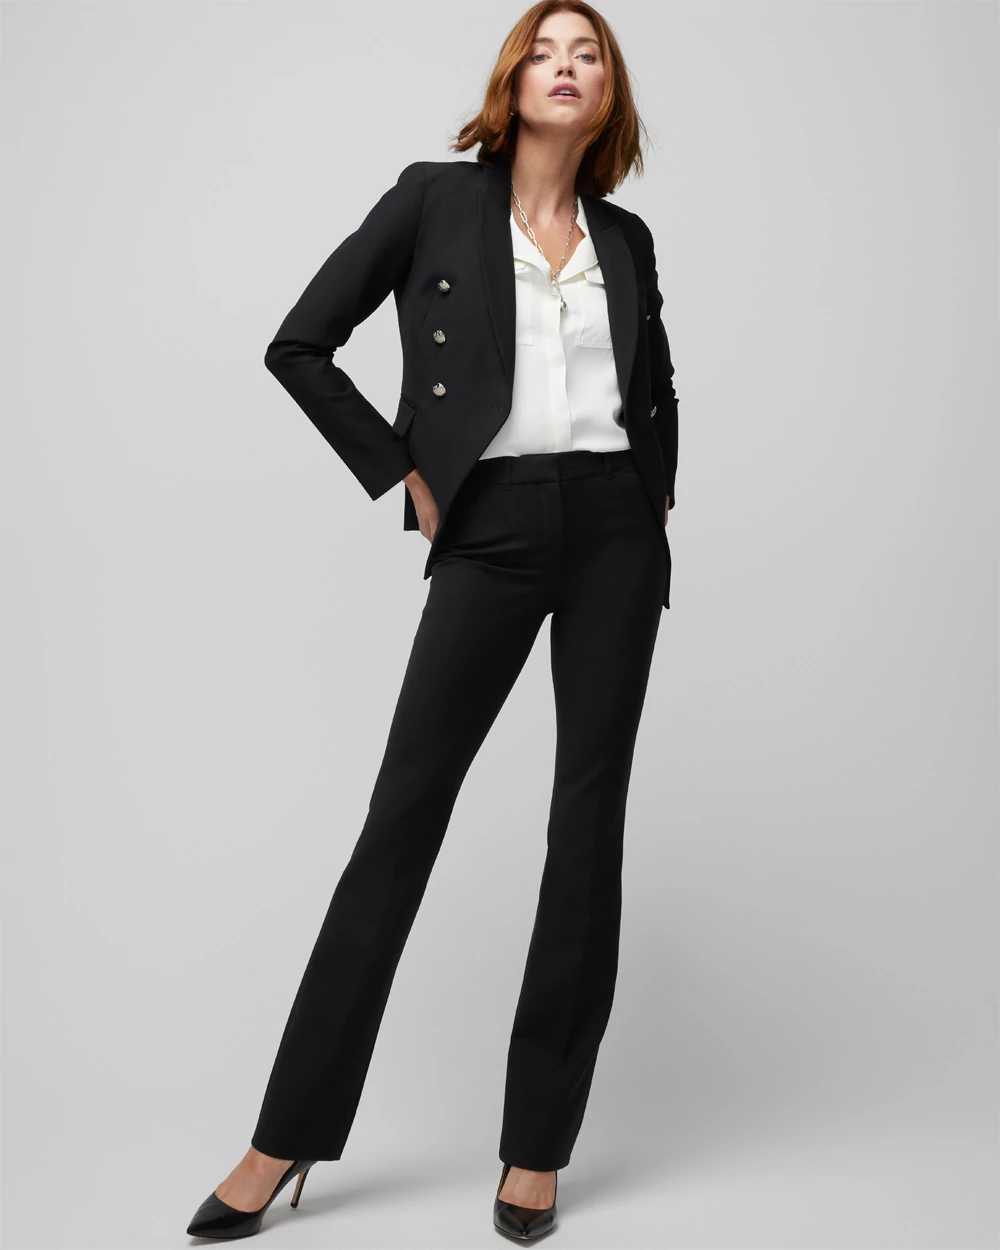 WHBM® Petite Ines Slim Bootcut Comfort Stretch Pant click to view larger image.